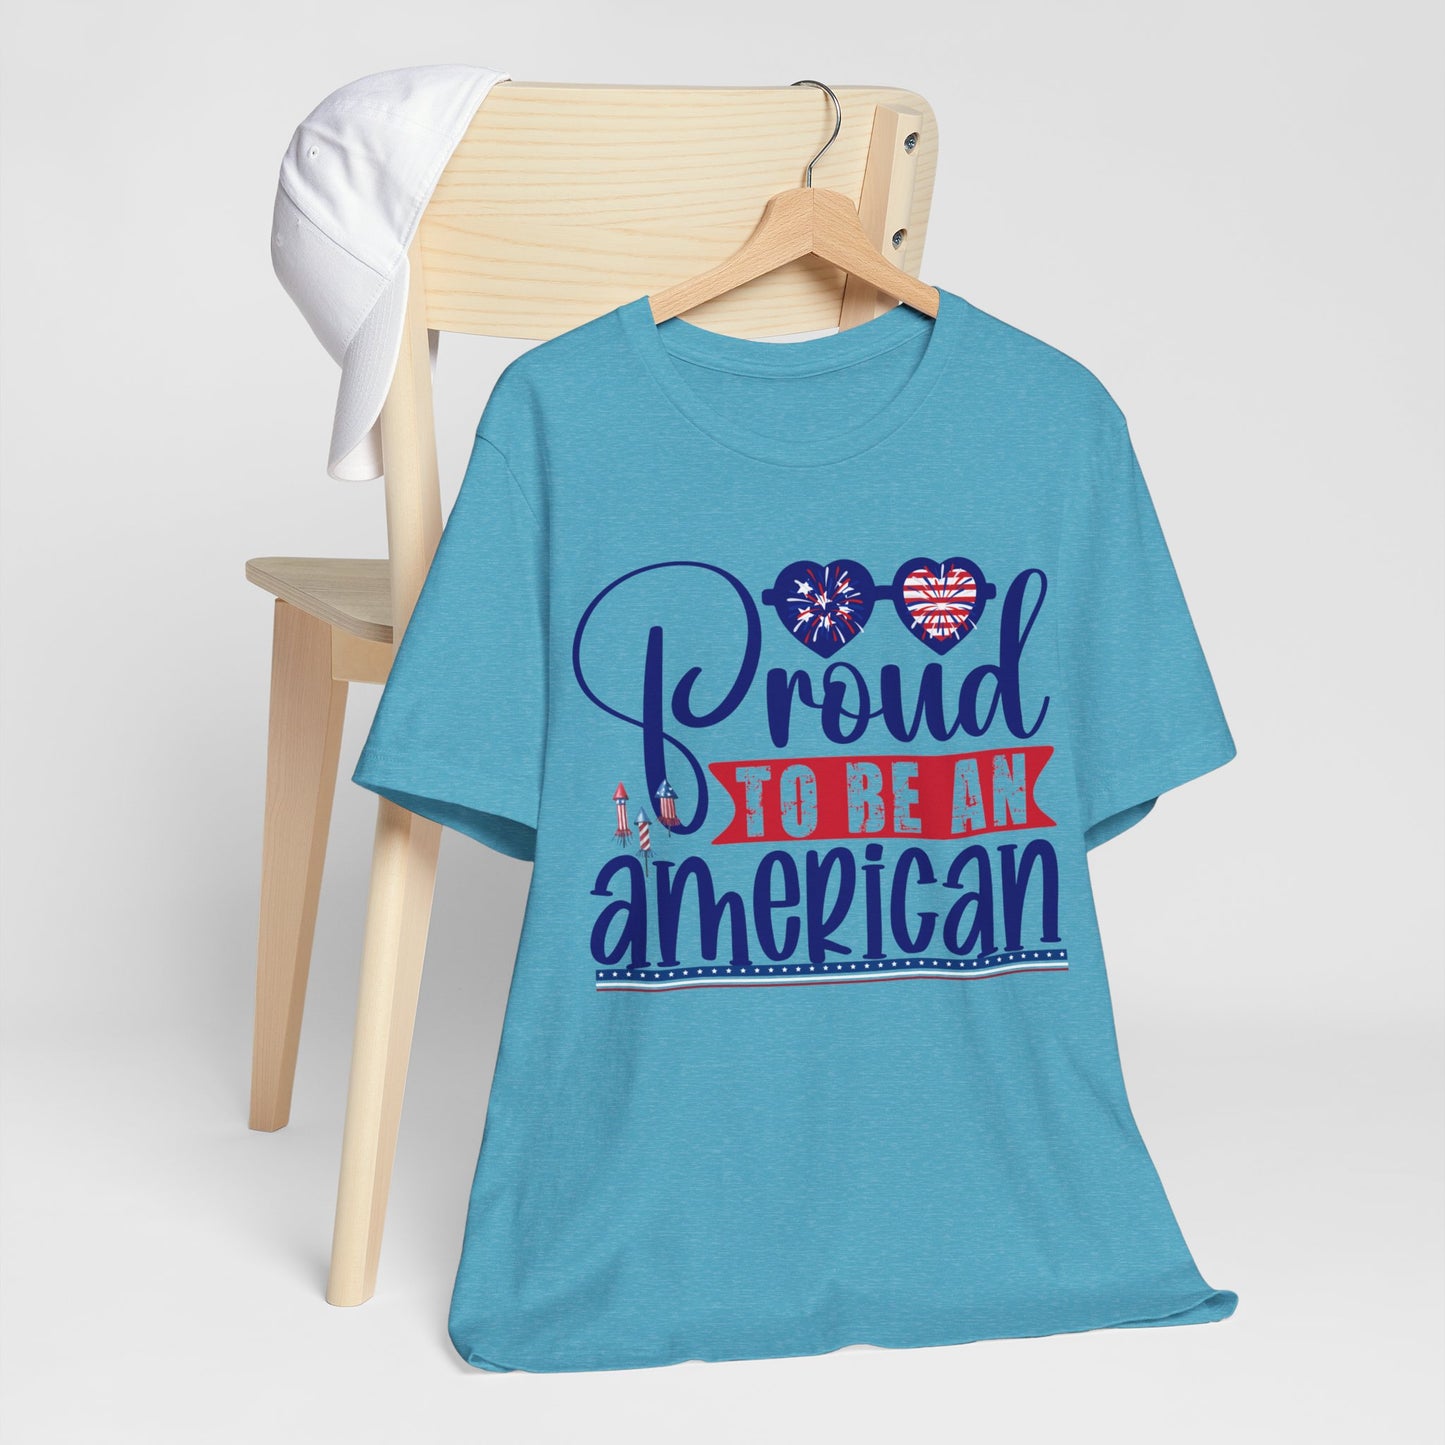 4th of July T-Shirt, Proud To Be An American T-shirt,  Fourth of July unisex jersey short sleeve.